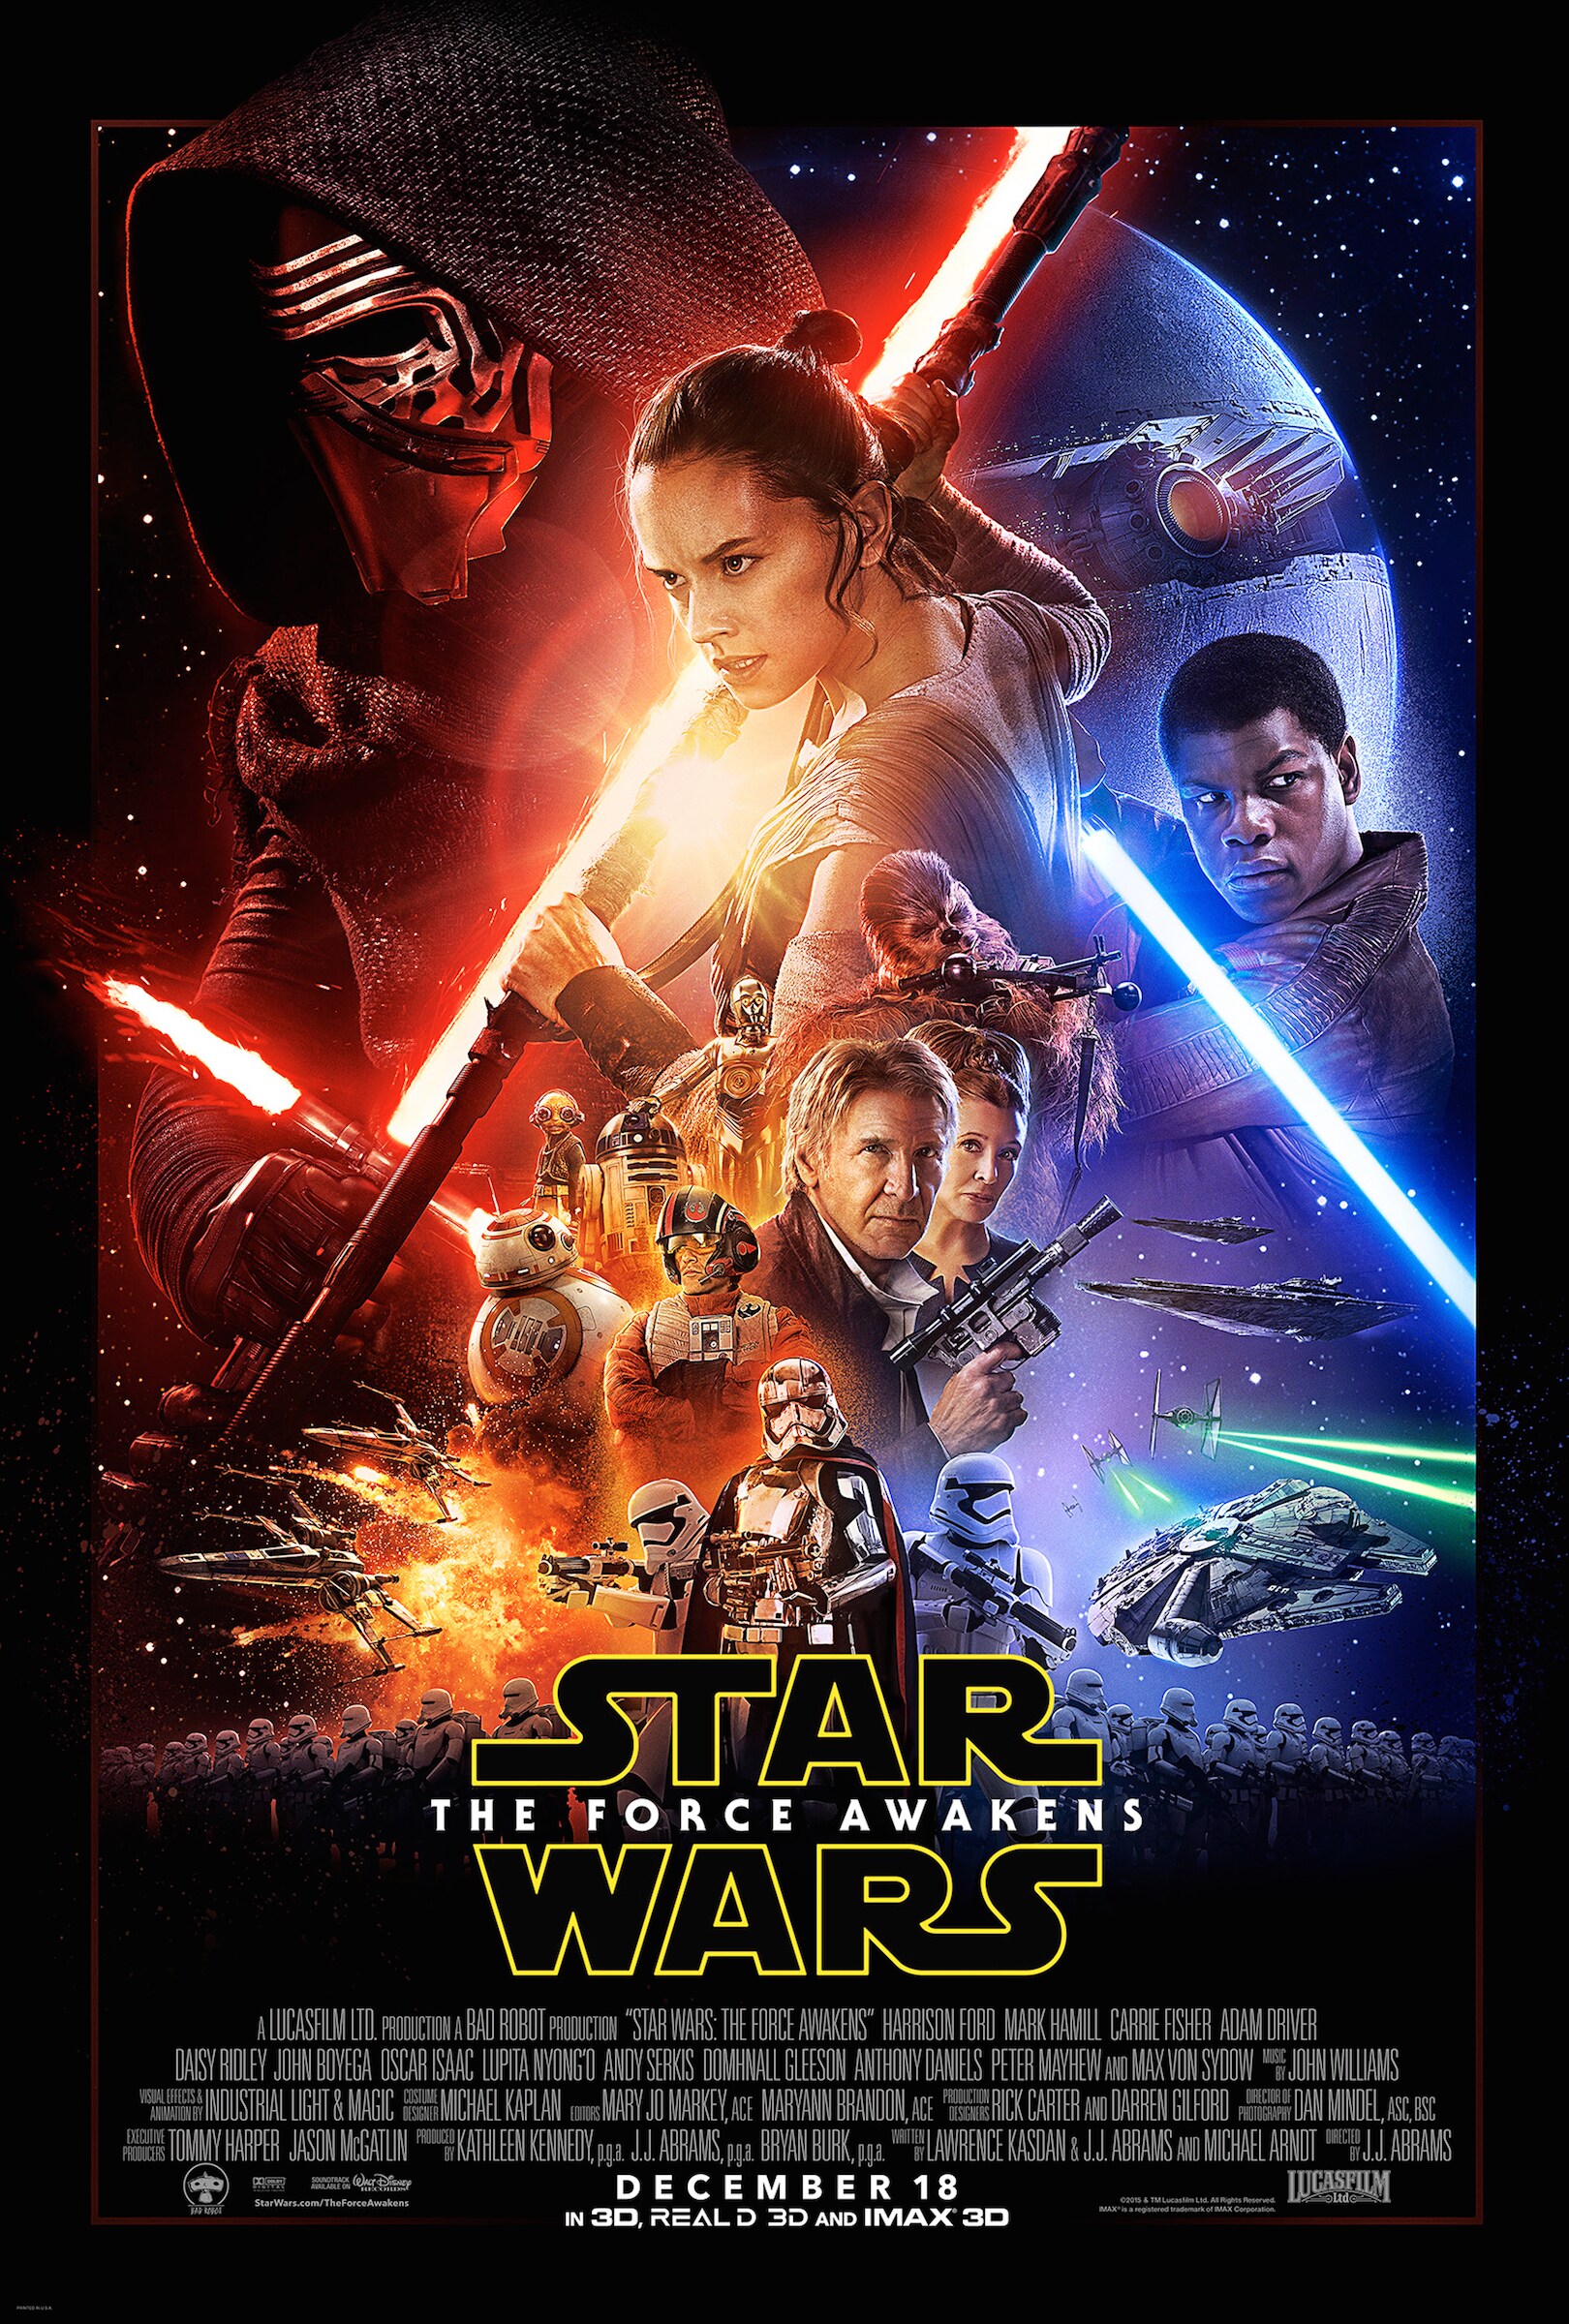 star wars the force awakens full movie download free